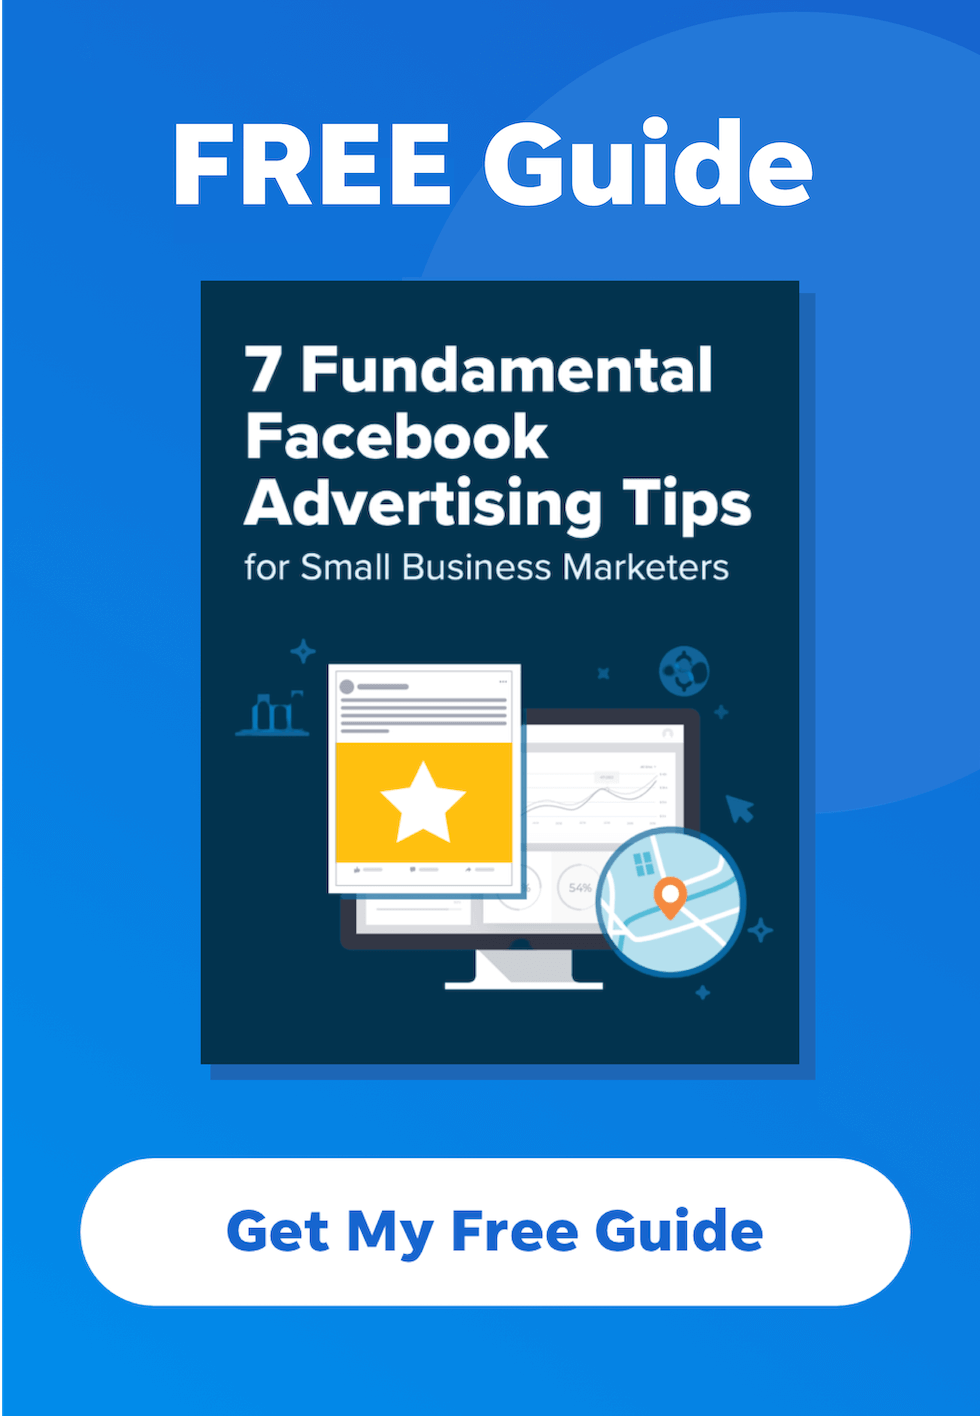 cover thumbnail and sidebar offer for facebook advertising tips guide